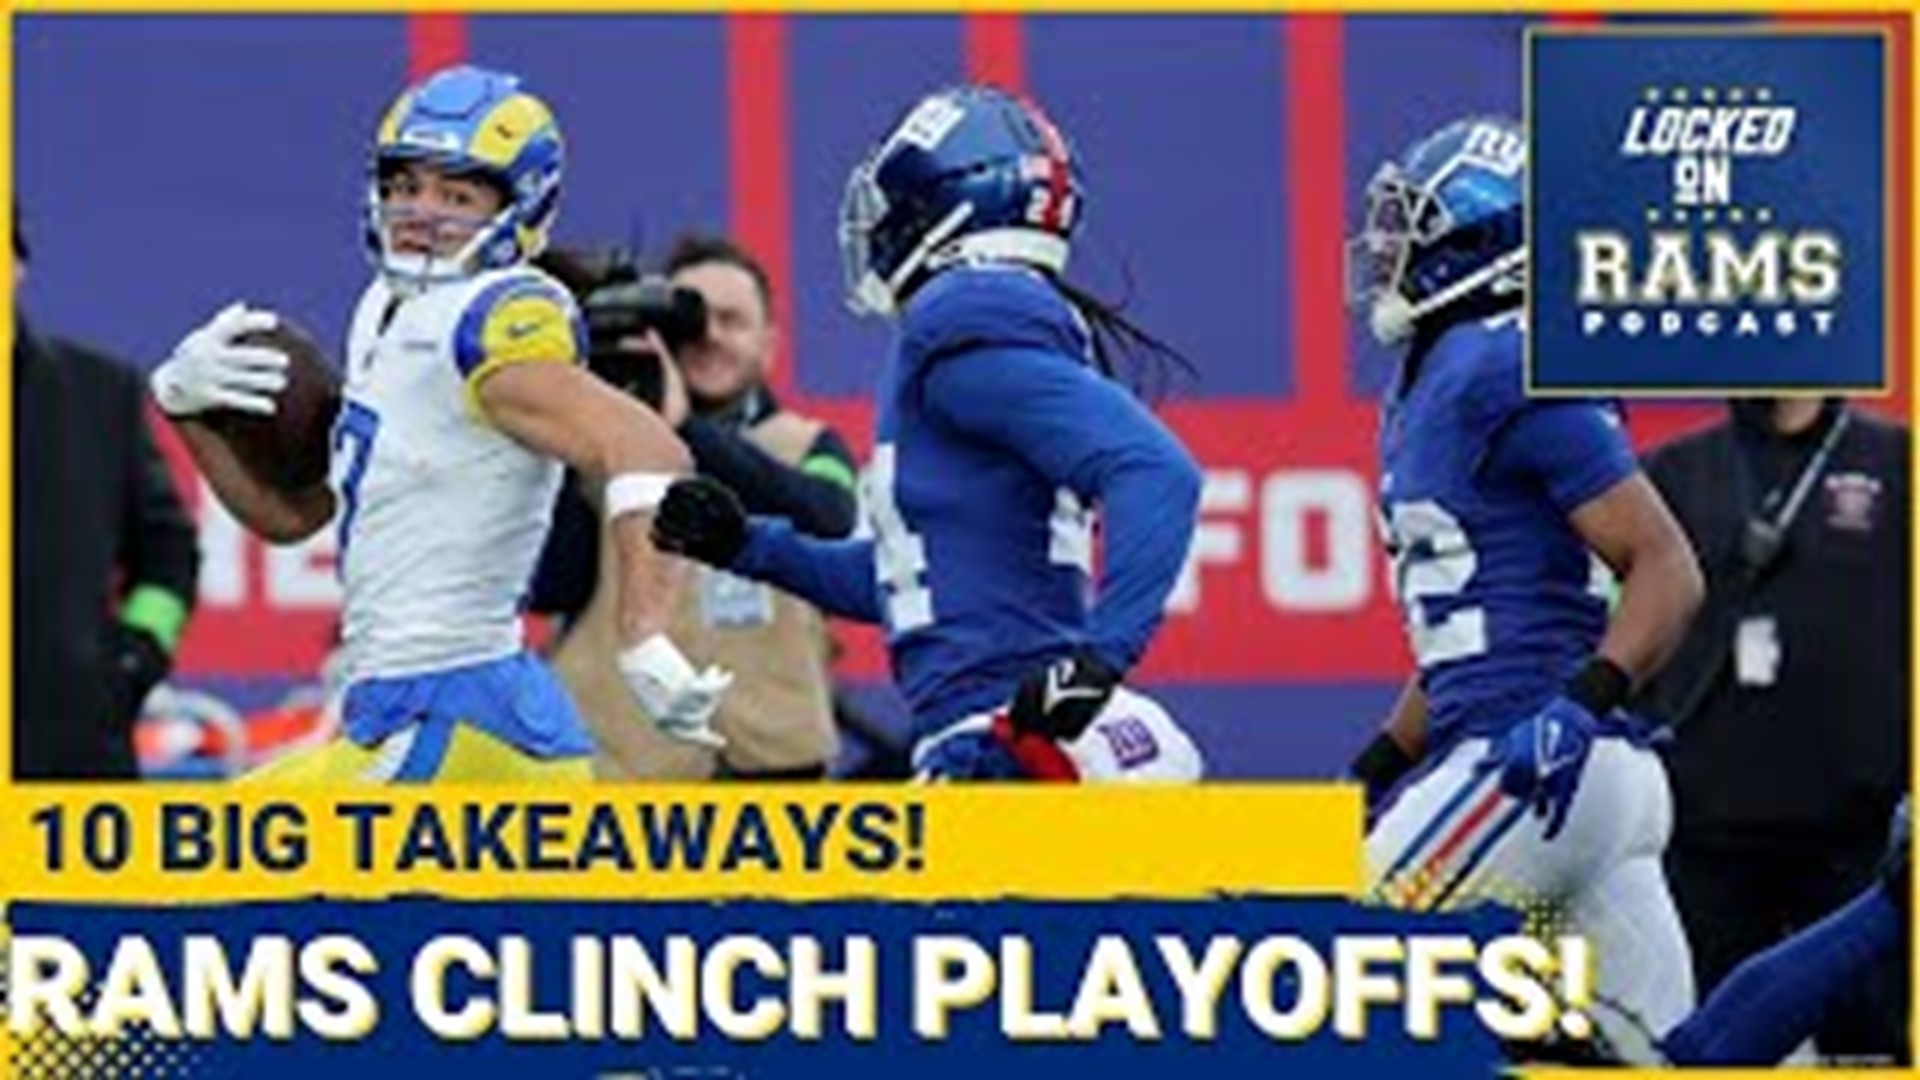 The Los Angeles Rams punched their ticket to the playoffs with a road win over the New York Giants and a Seahawks loss to the Steelers.